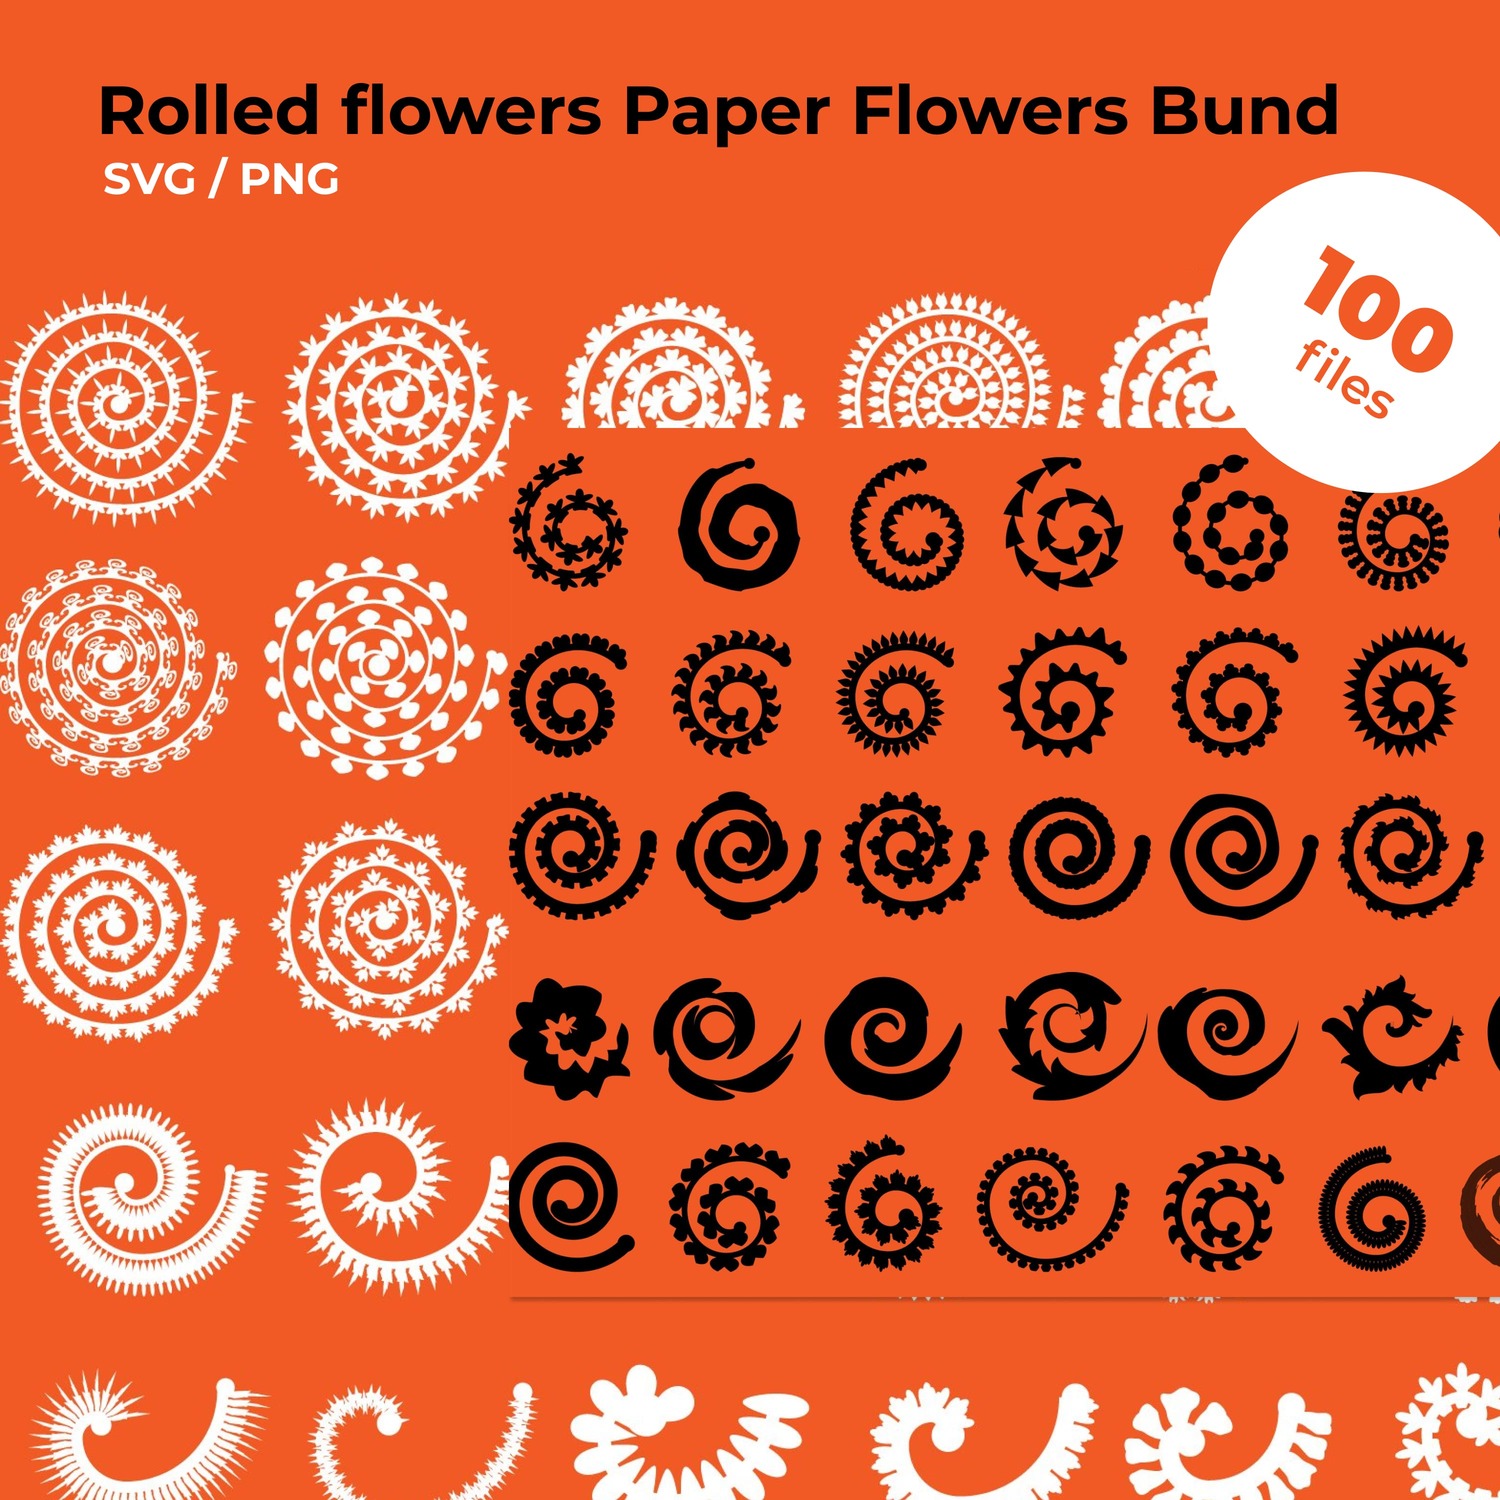 100 Rolled flowers Paper Flowers Bund SVG PNG cover image.